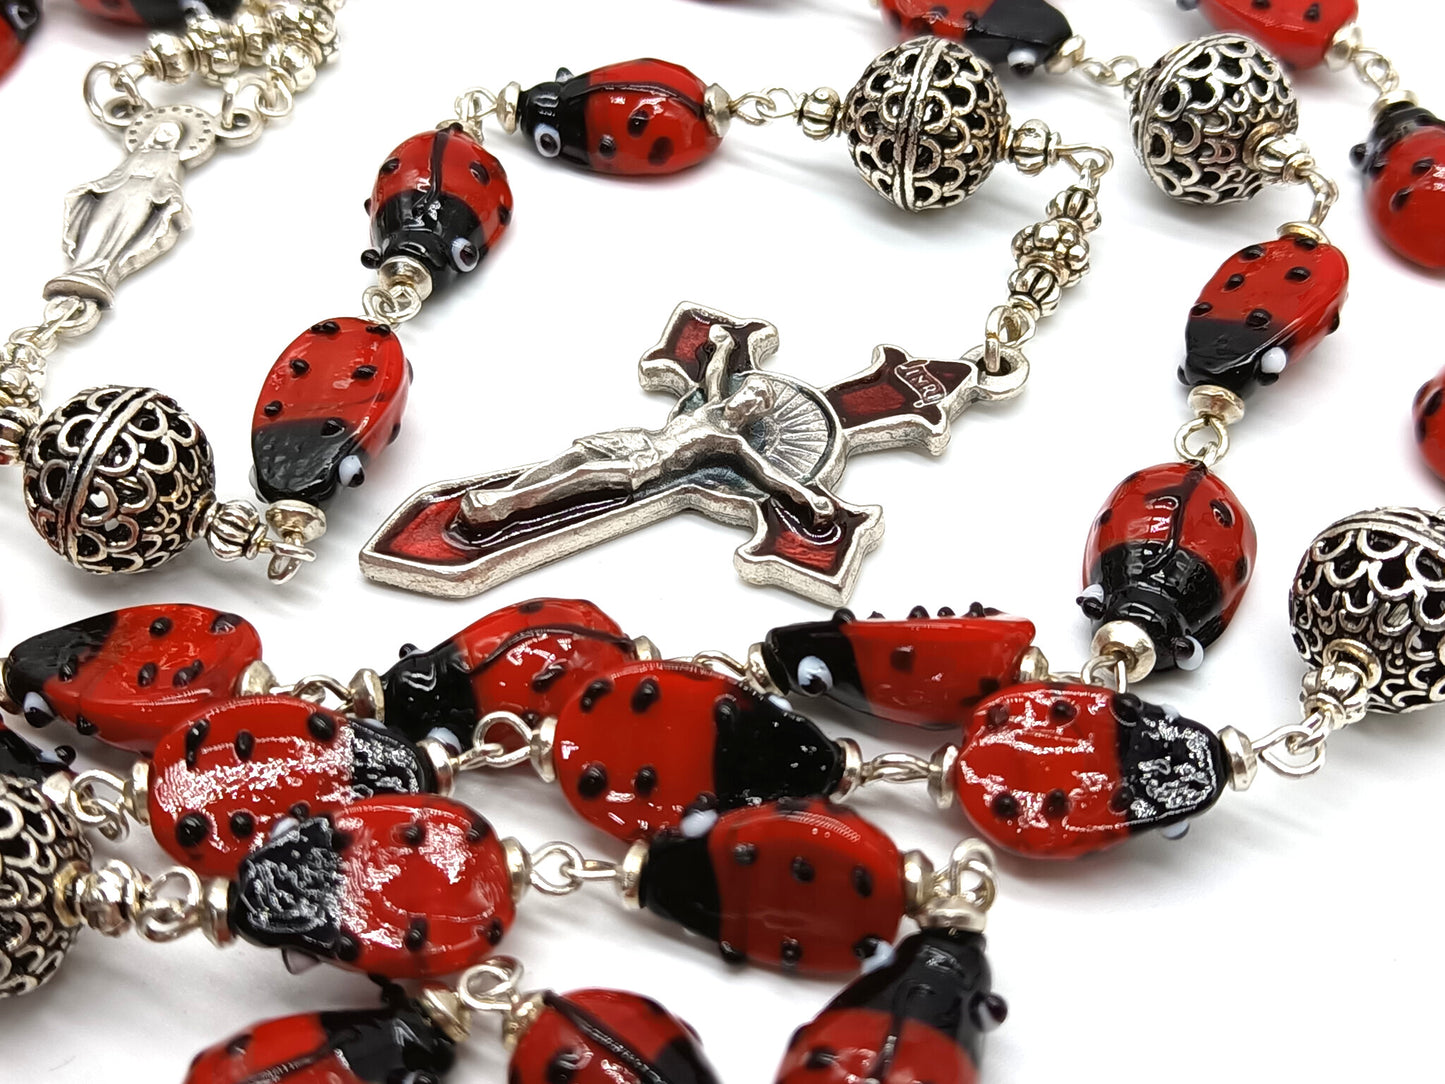 Lady Bug unique rosary beads with glass lady bird beads and red enamel crucifix and silver centre medal.